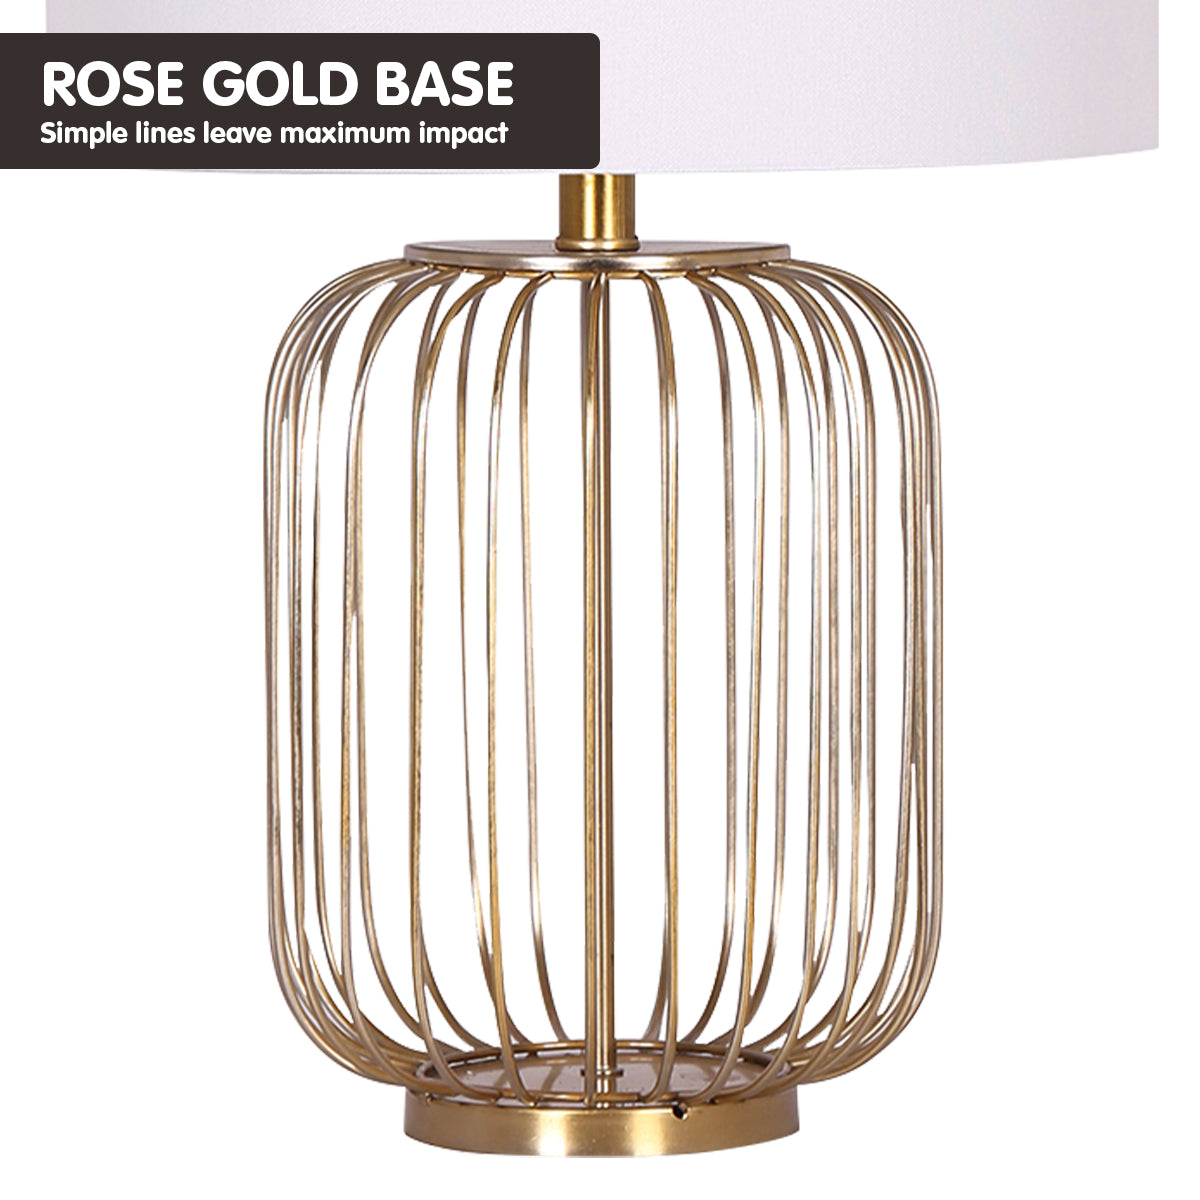 Sarantino Rose Gold Table Lamp with Linen Drum Shade - BM House & Garden